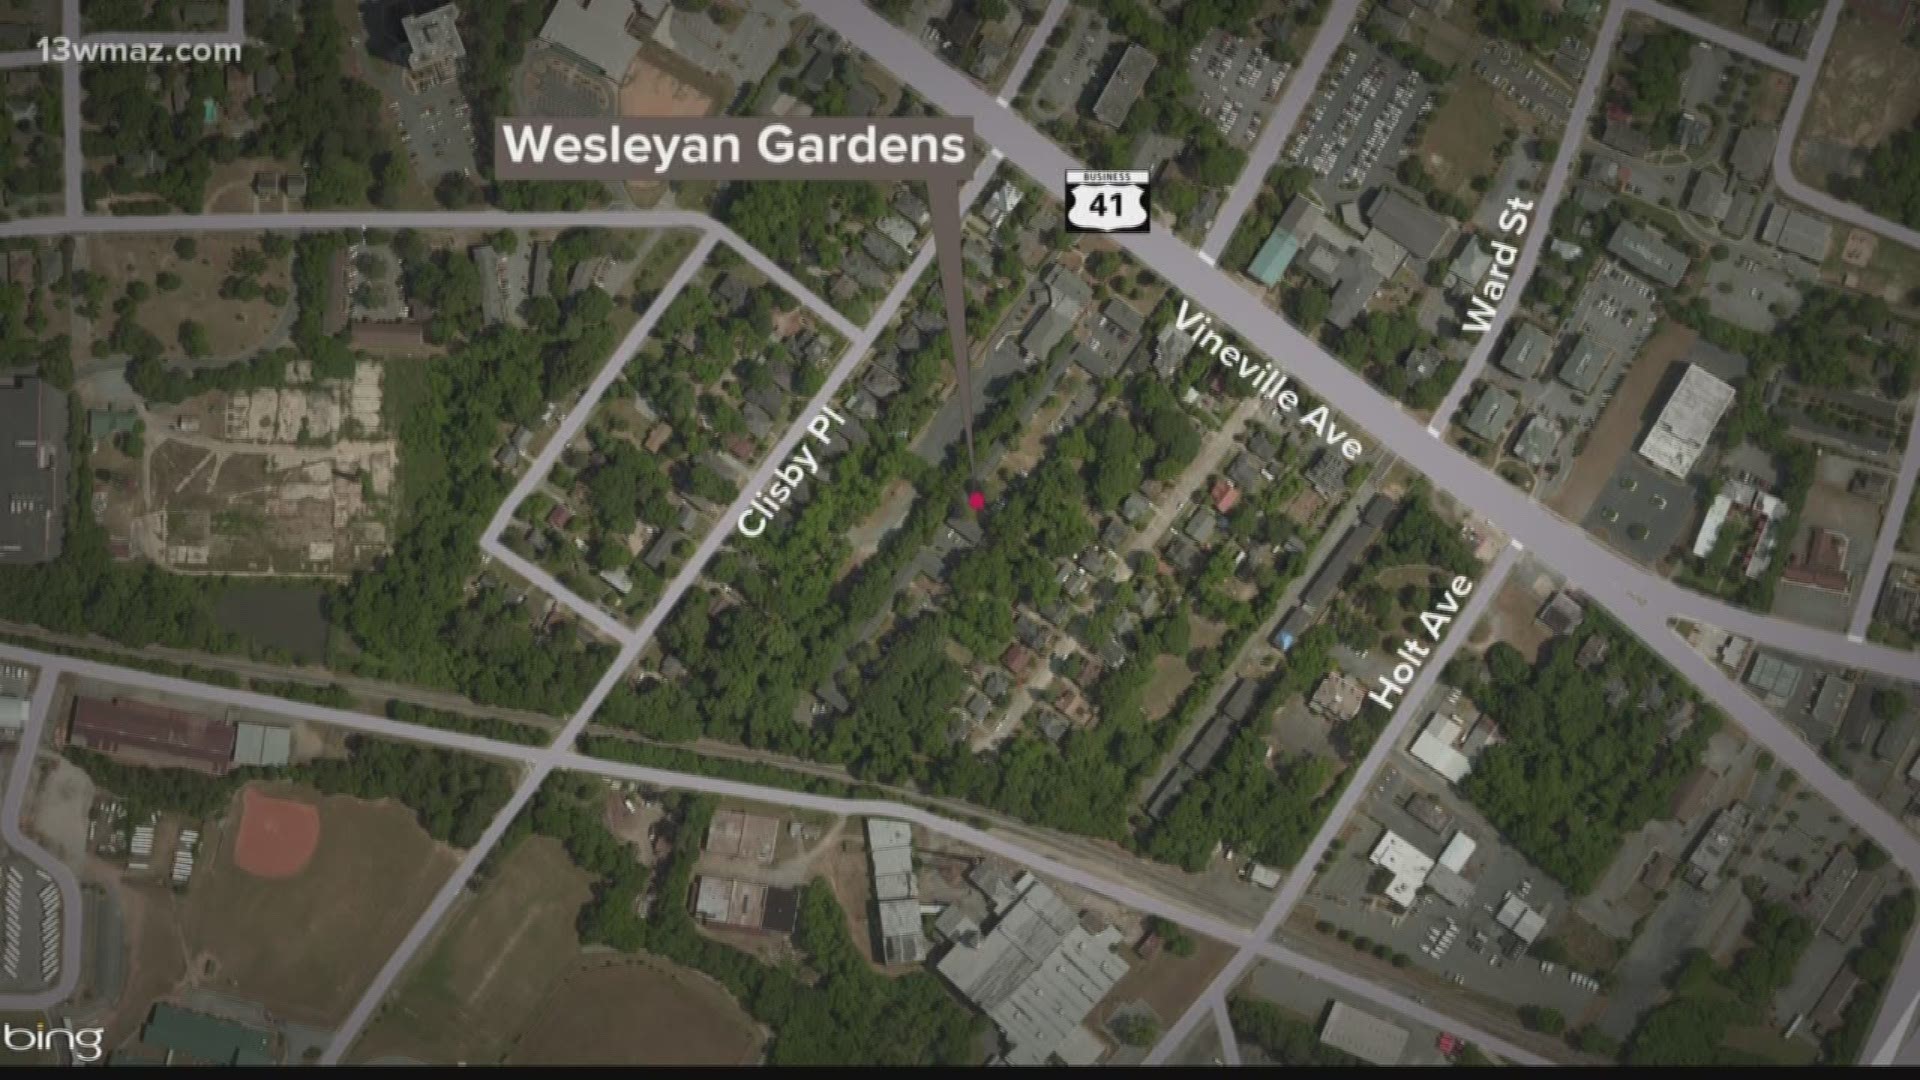 The woman went to Wesleyan Gardens to pick someone up, but two men stole her car instead